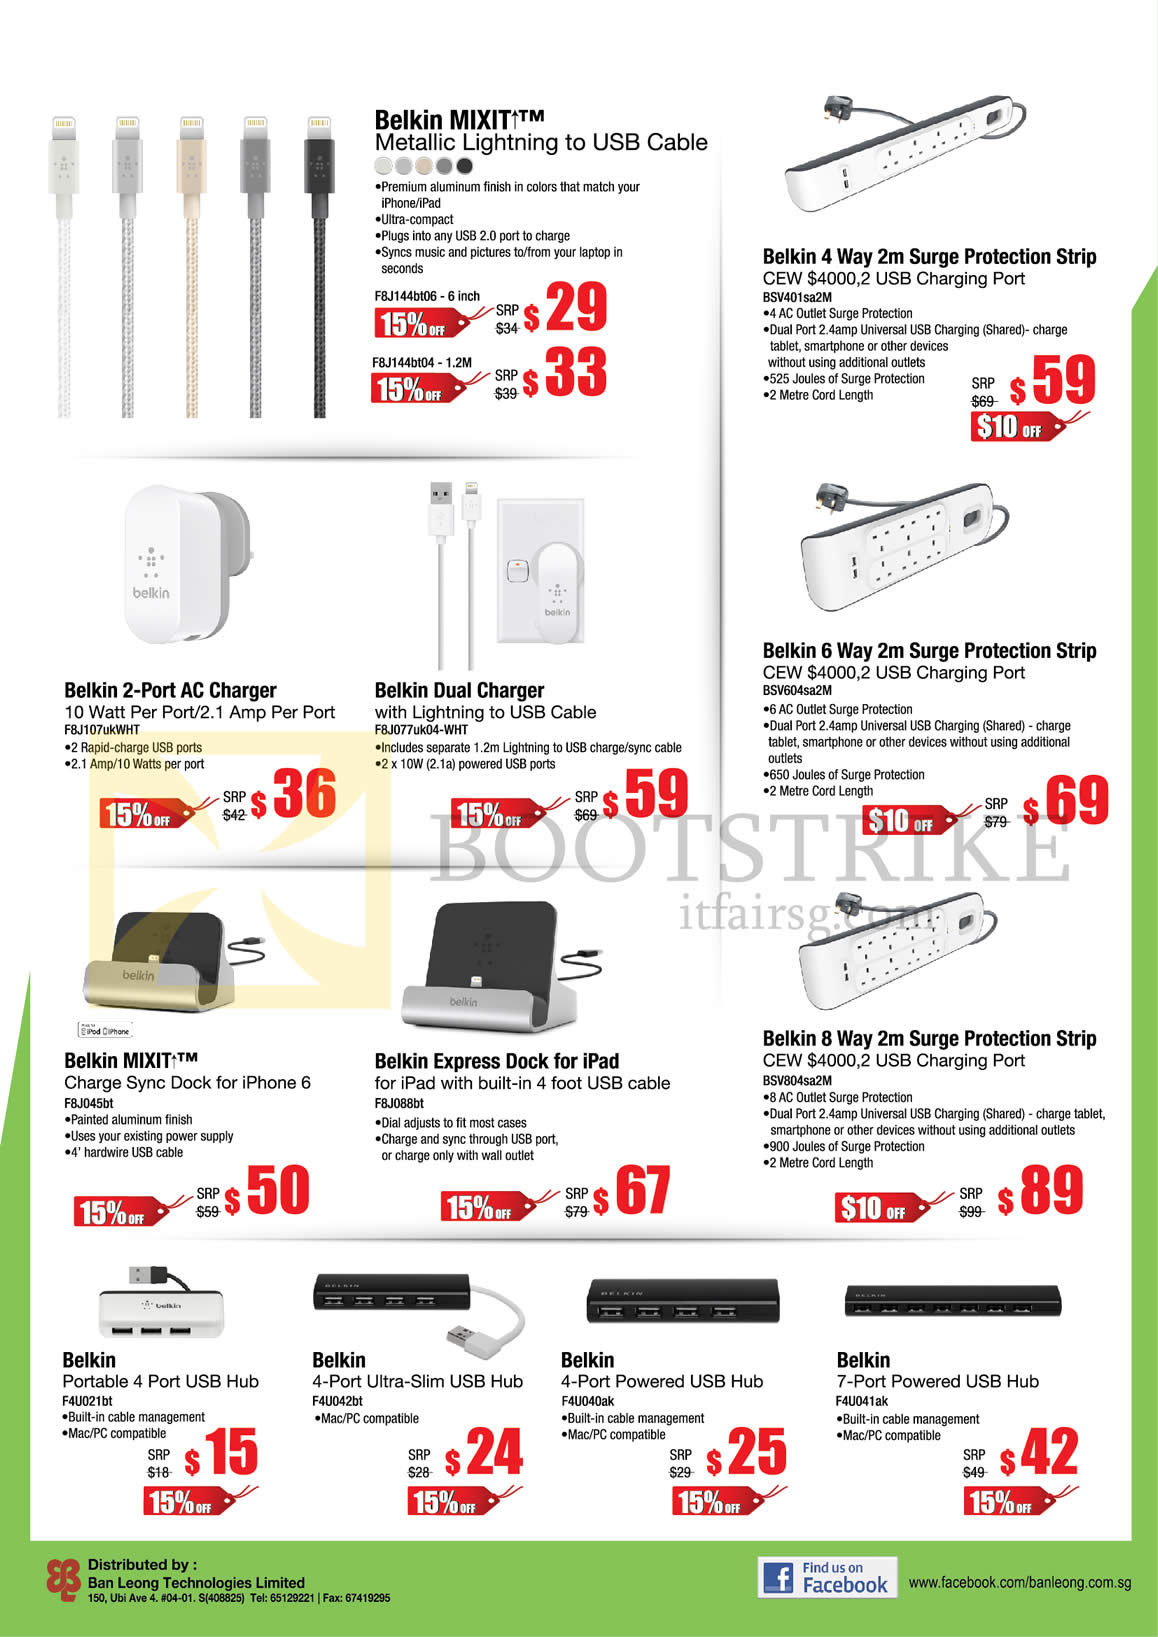 PC SHOW 2015 price list image brochure of Nubox Belkin Cables Mixit Lightning USB, Surge Protection Strip, AC Charger, Express Dock, USB Hub